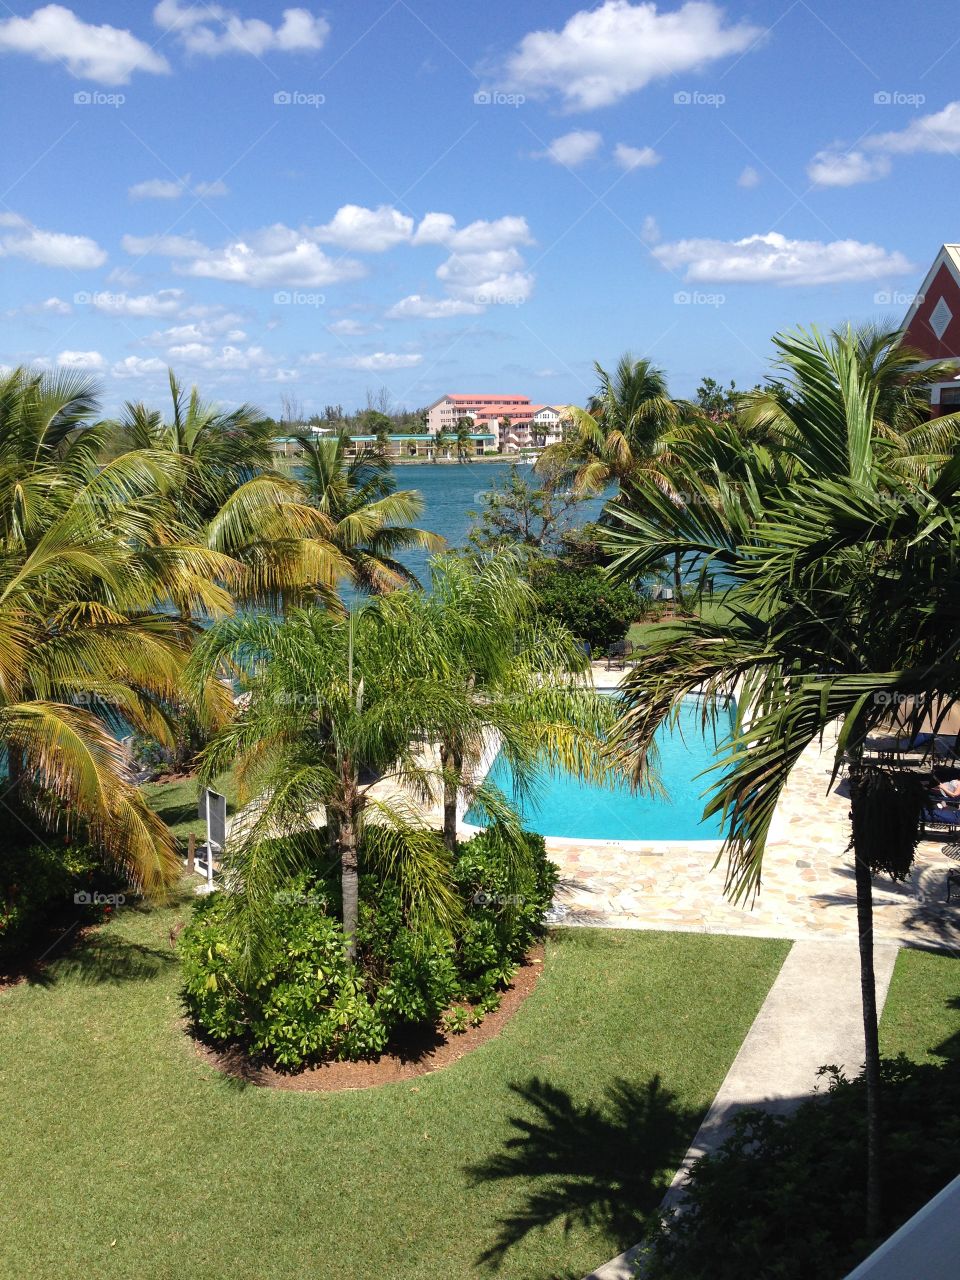 Pool and Ocean. Occasionally a palm tree.   Freeport, Bahamas